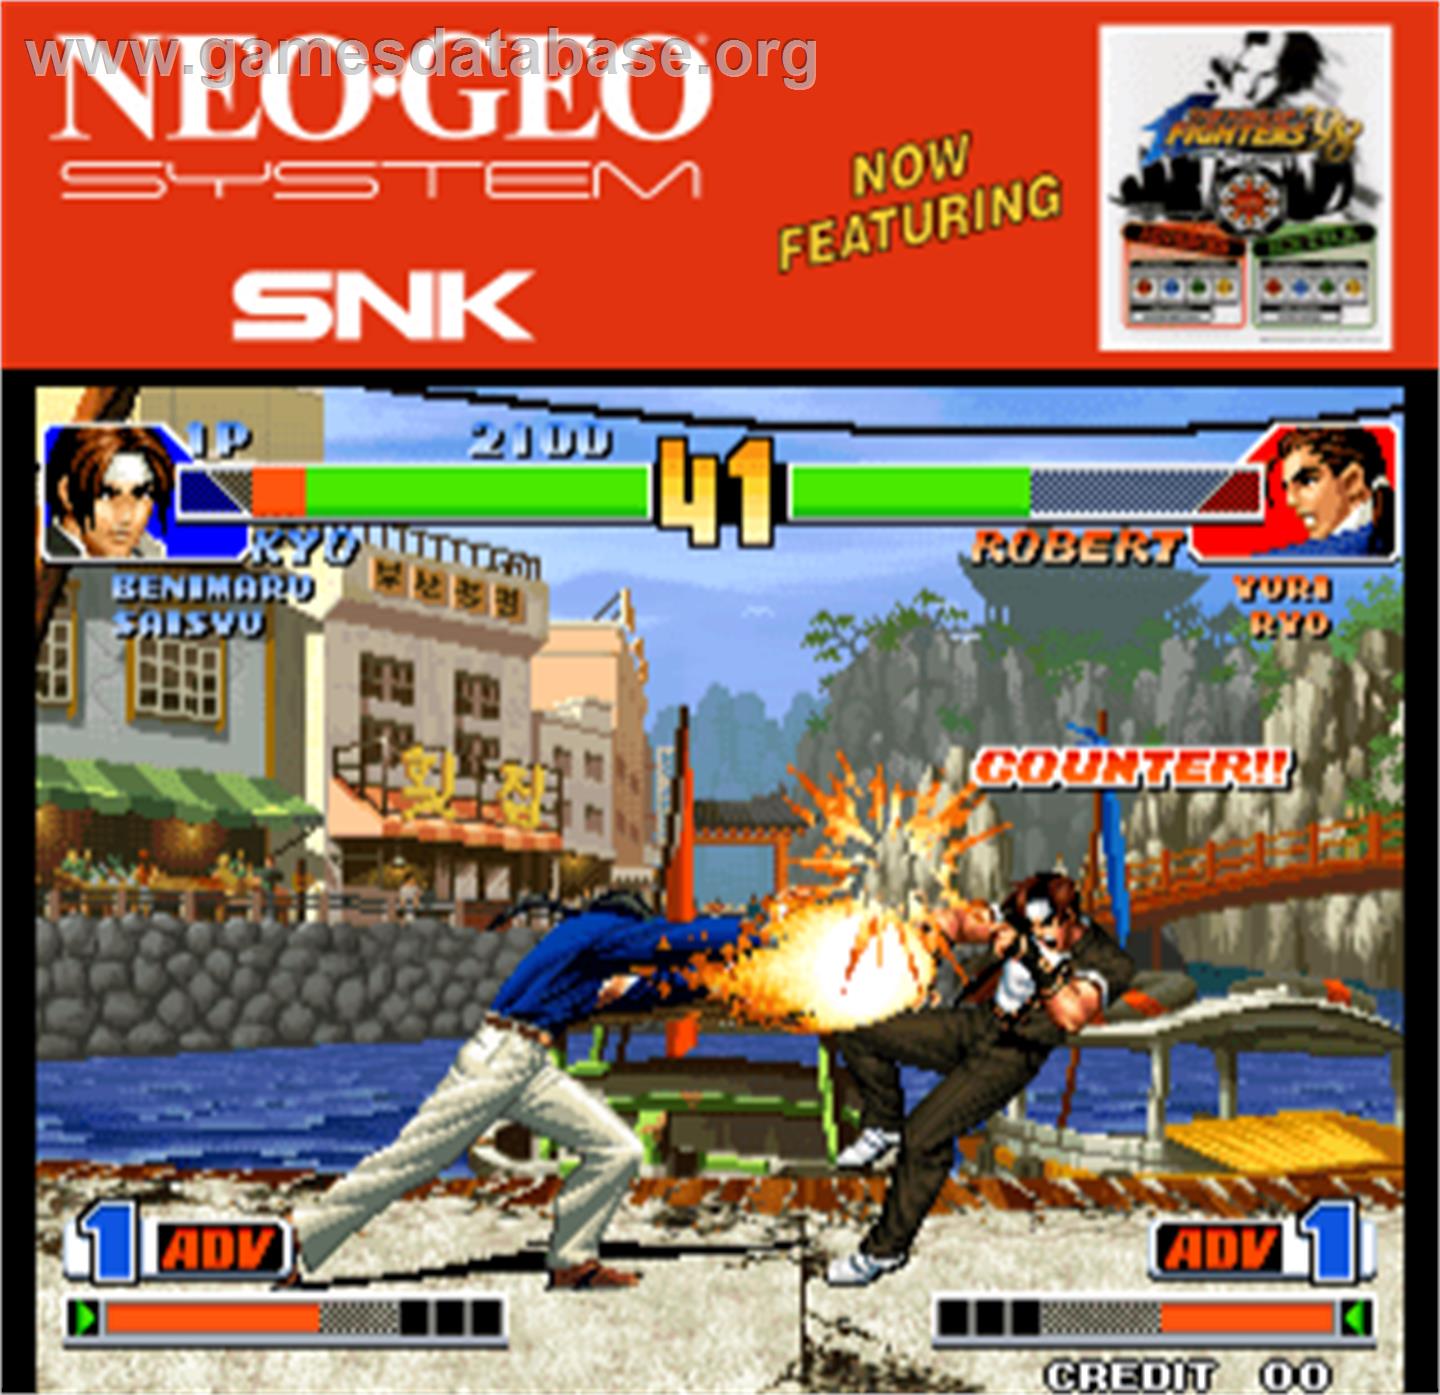 The King of Fighters '98 - The Slugfest / King of Fighters '98 - dream match never ends - Arcade - Artwork - Artwork